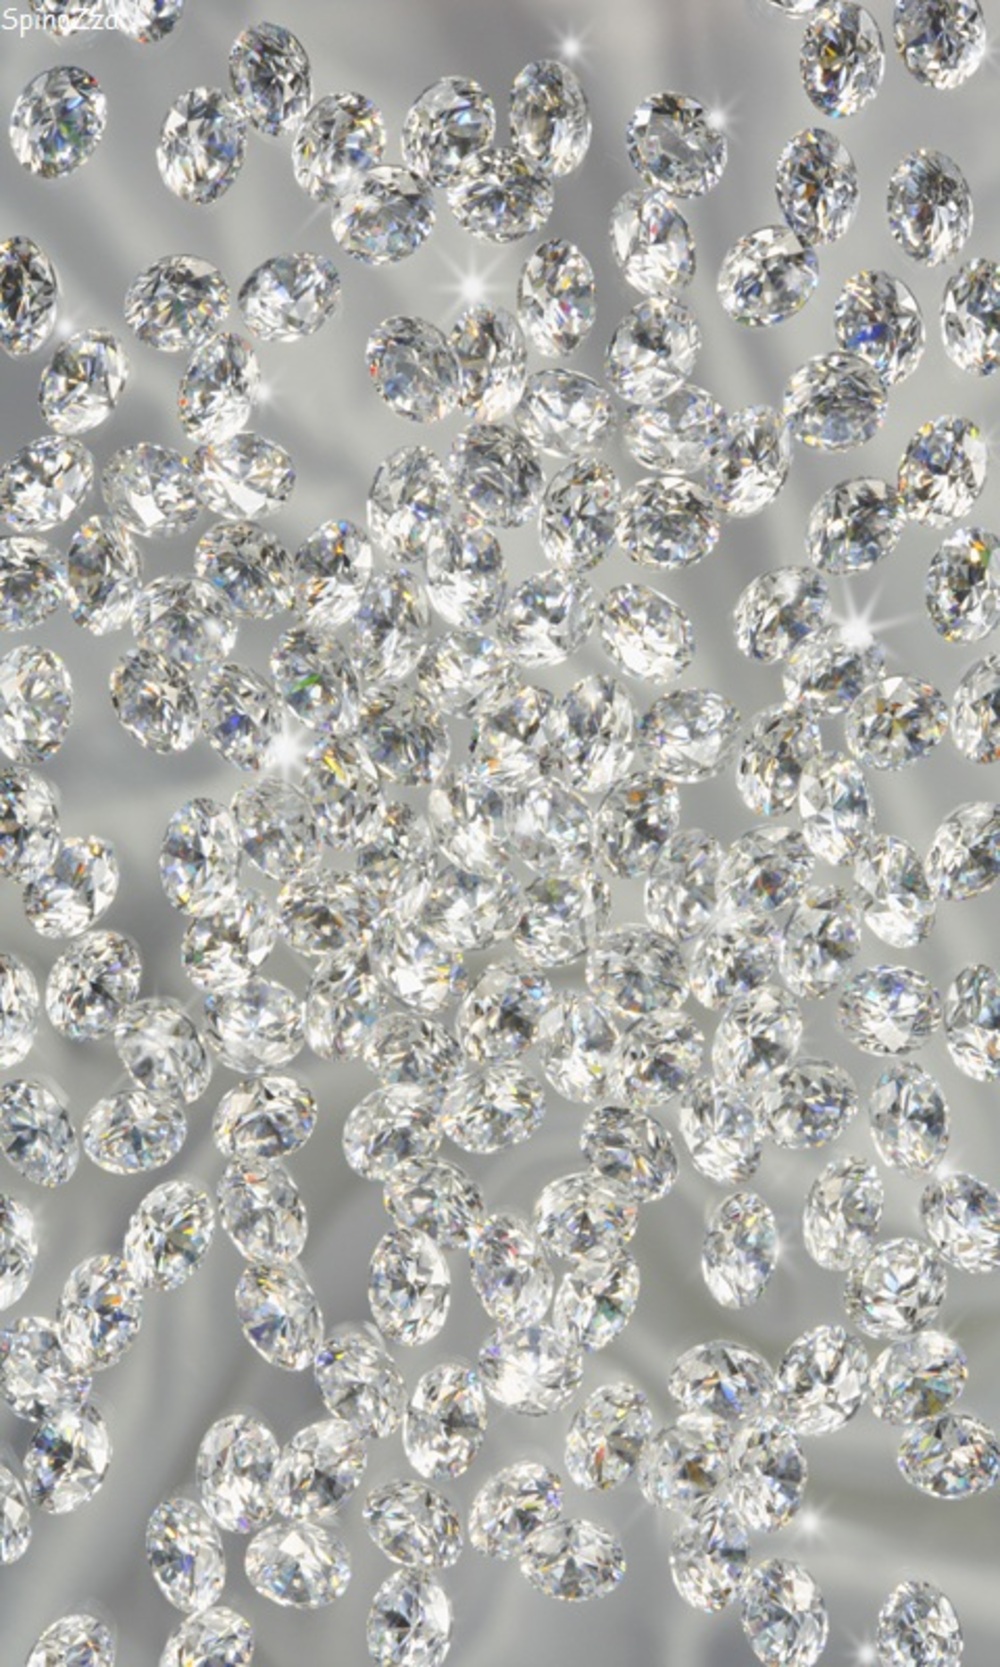 4K Rhinestone Wallpapers High Quality | Download Free